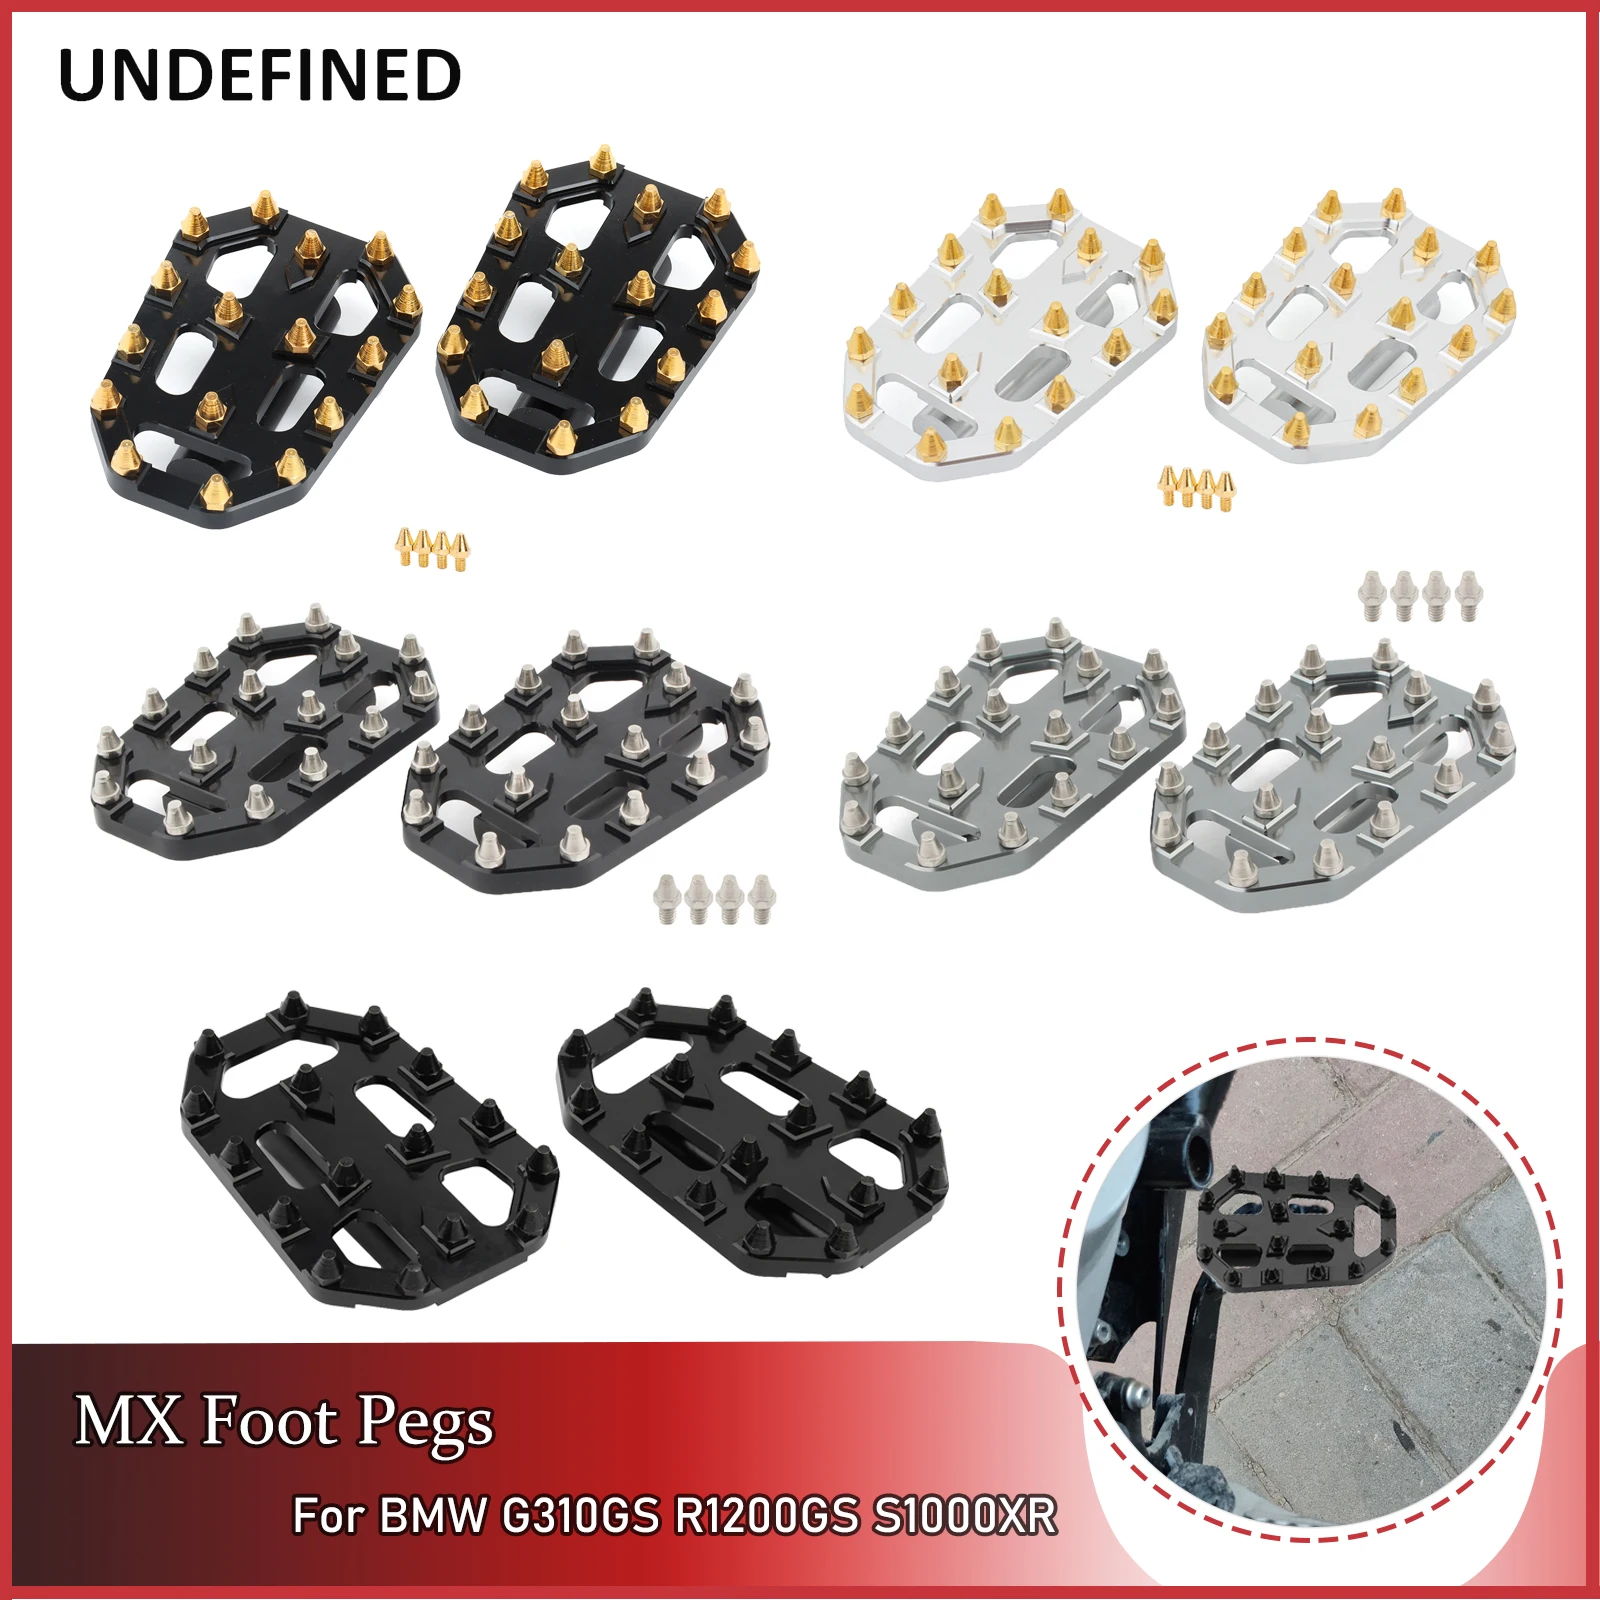 Motorcycle Wide Foot Pegs Pedals Scrambler Rest Footpegs For BMW Aluminum Footrests G310GS R1200GS 1000XR F750GS F850GS R Nine T